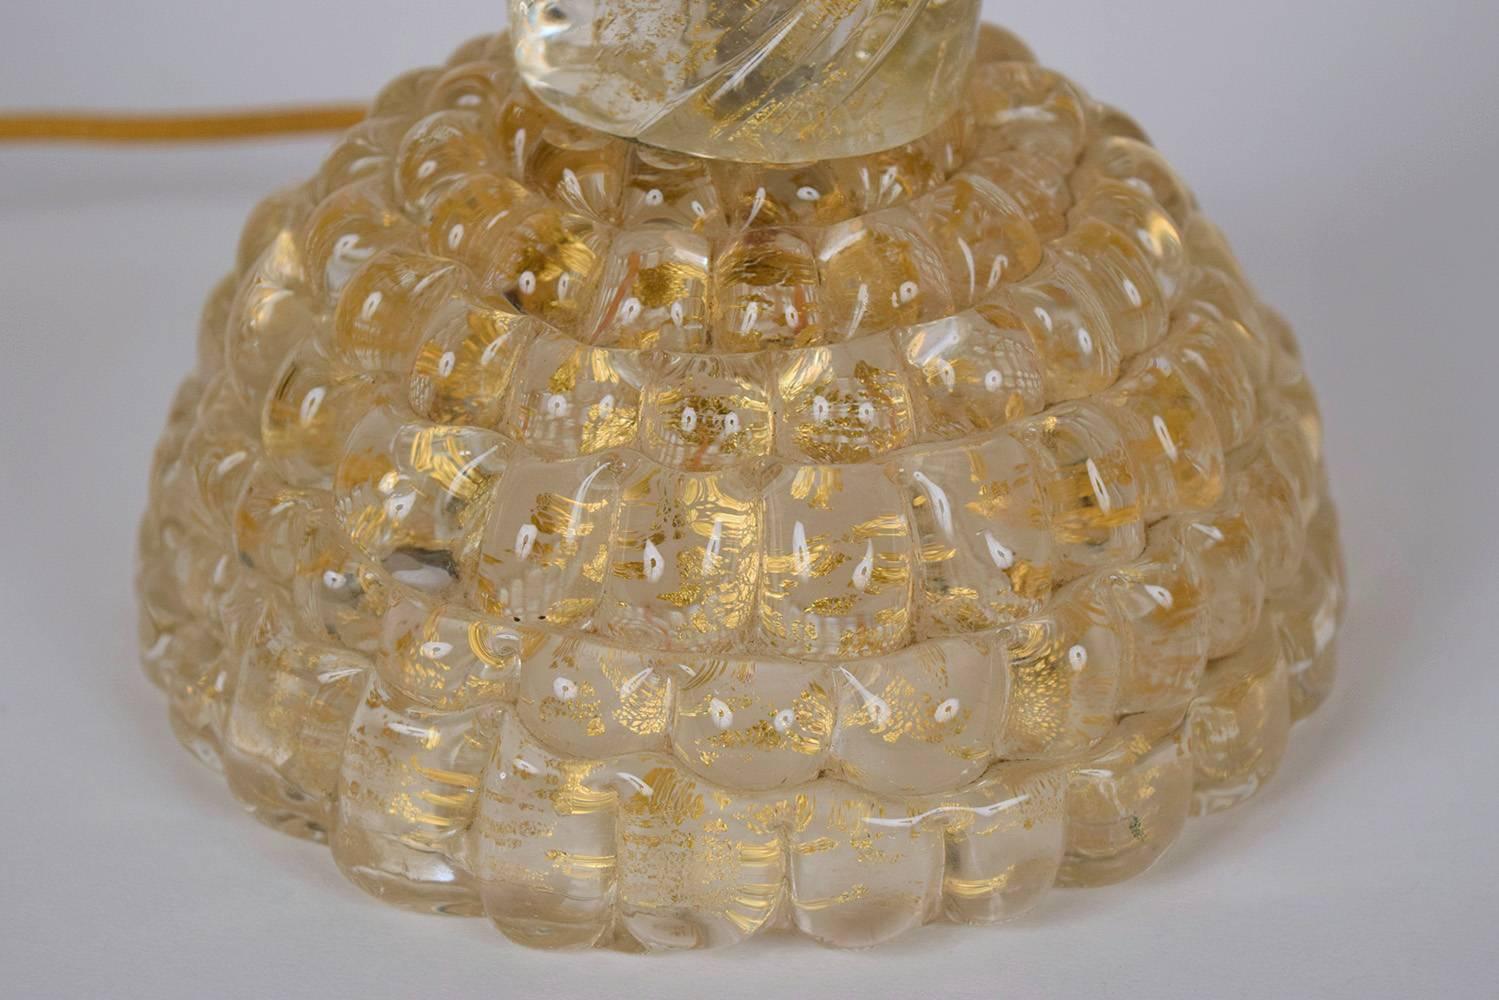 20th Century Pair of Murano Glass Table Lamps